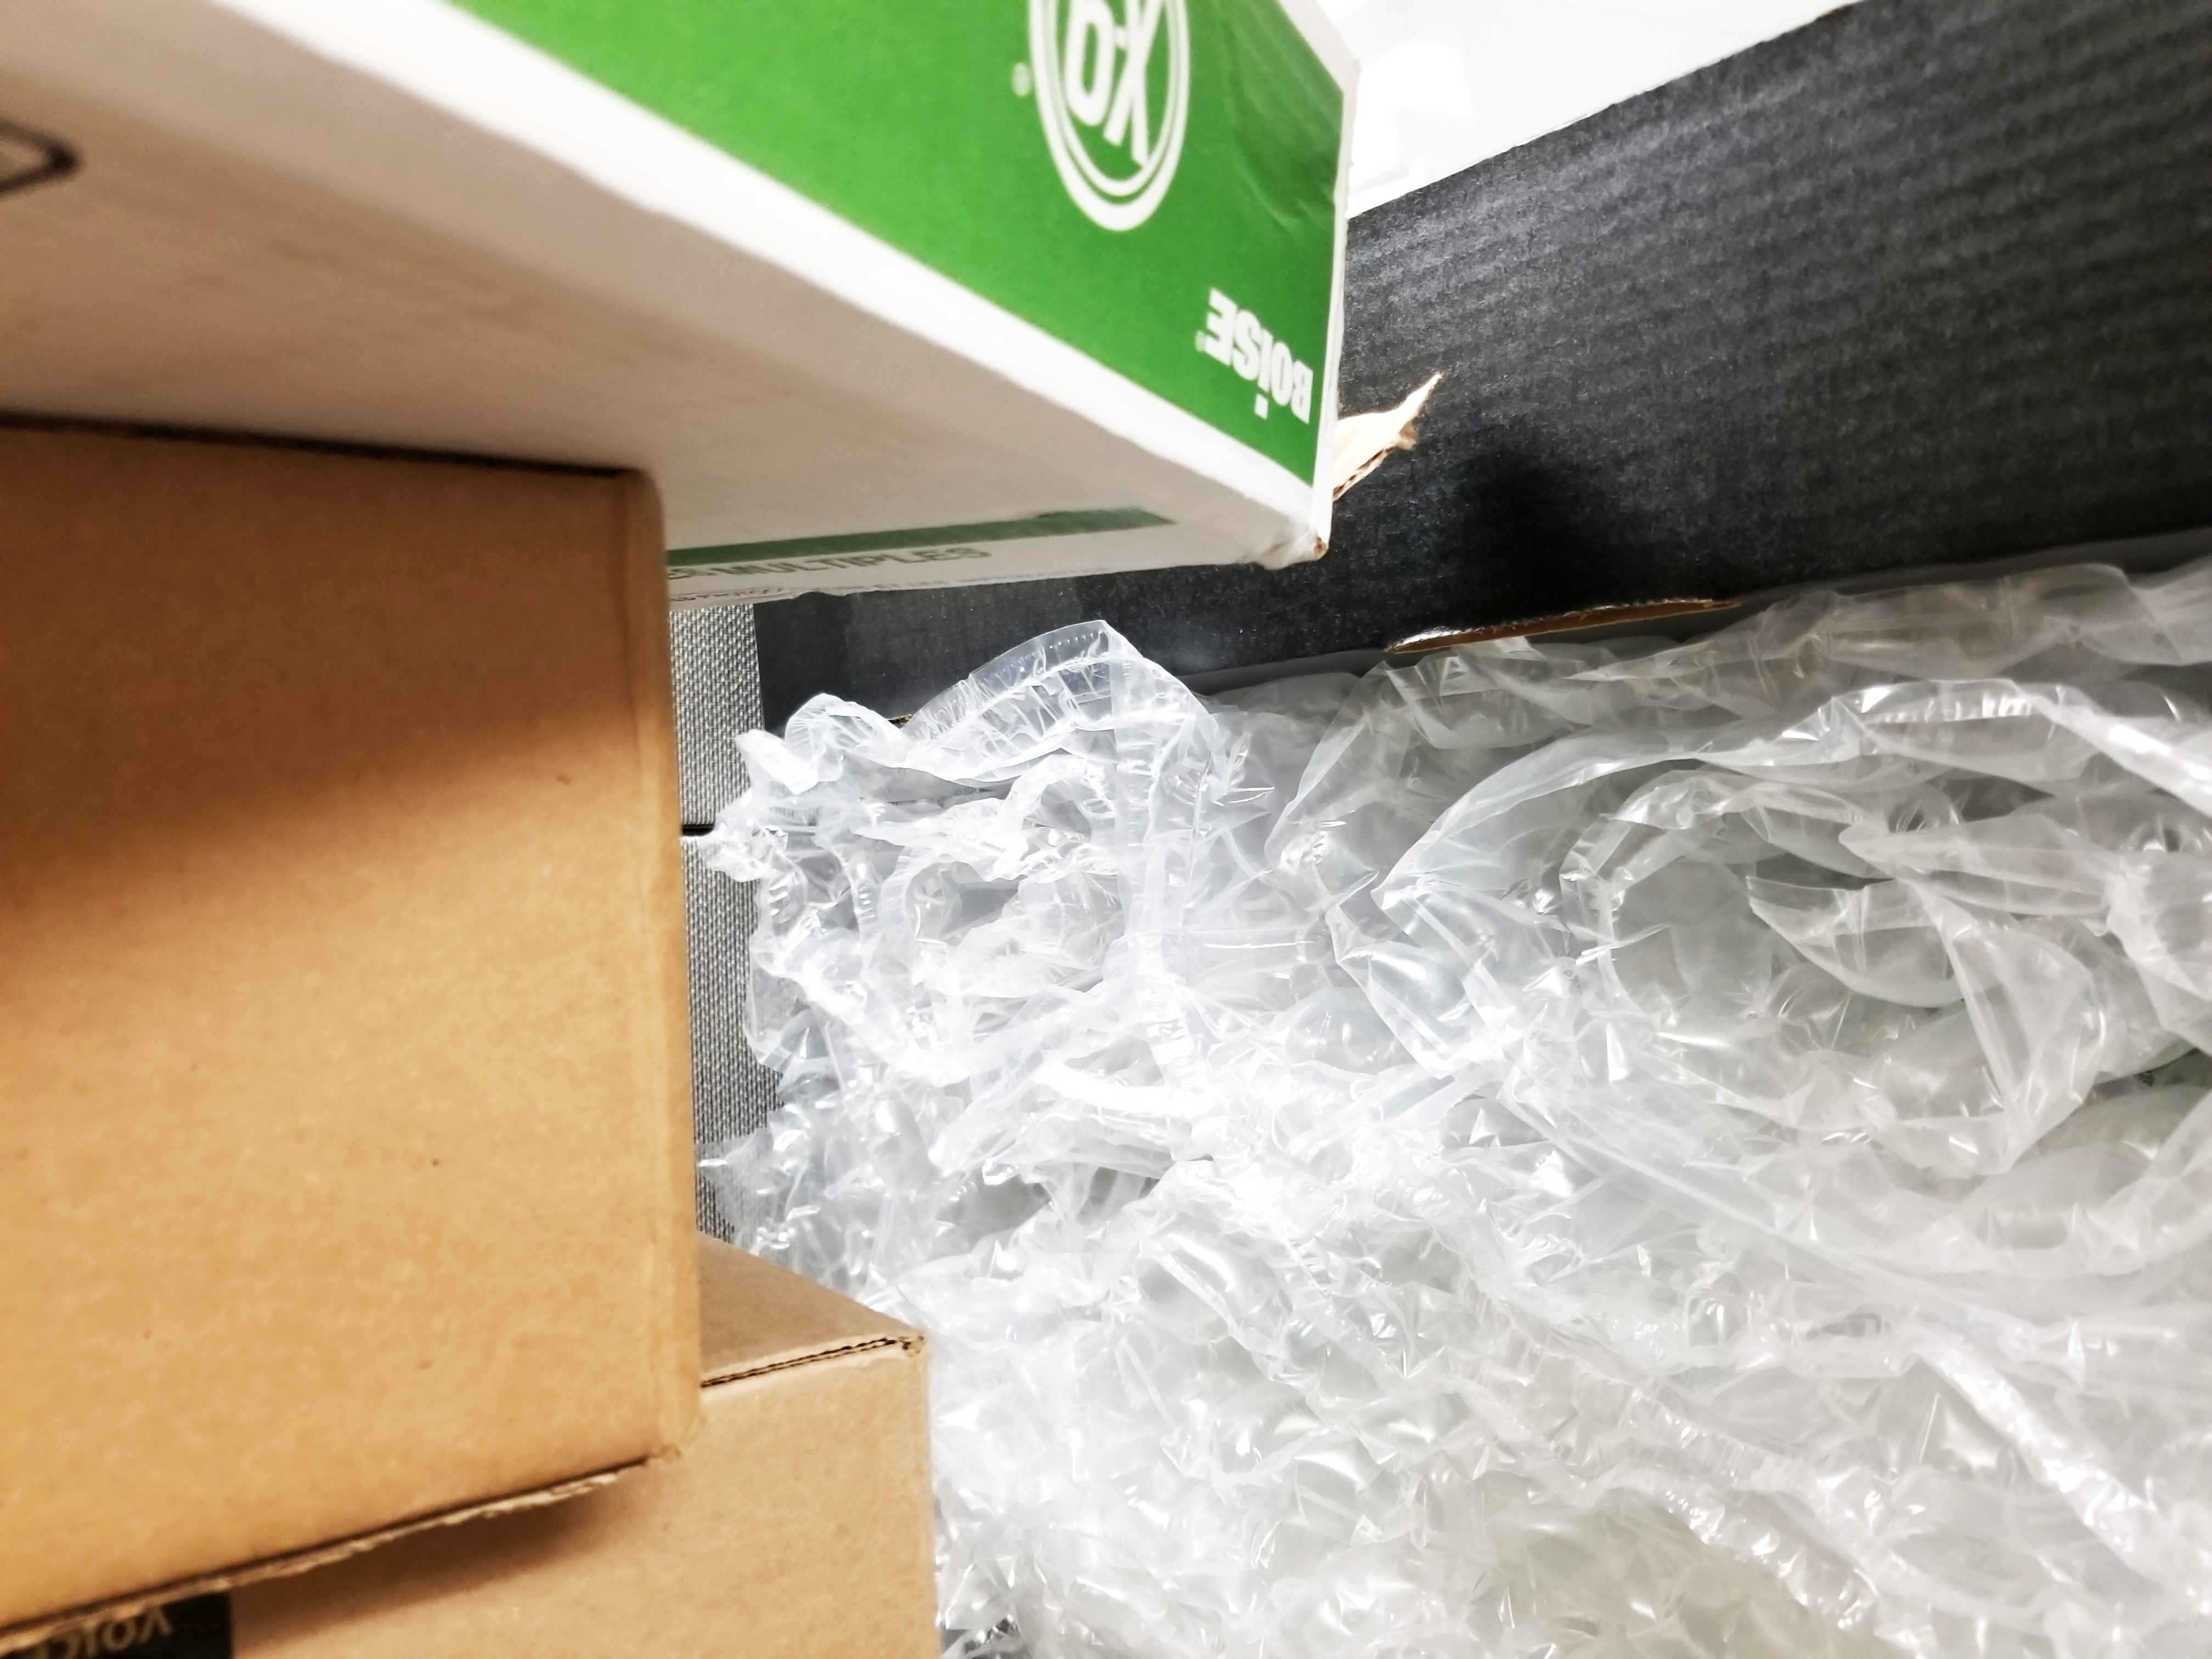 Bubble wrap and cardboard boxes